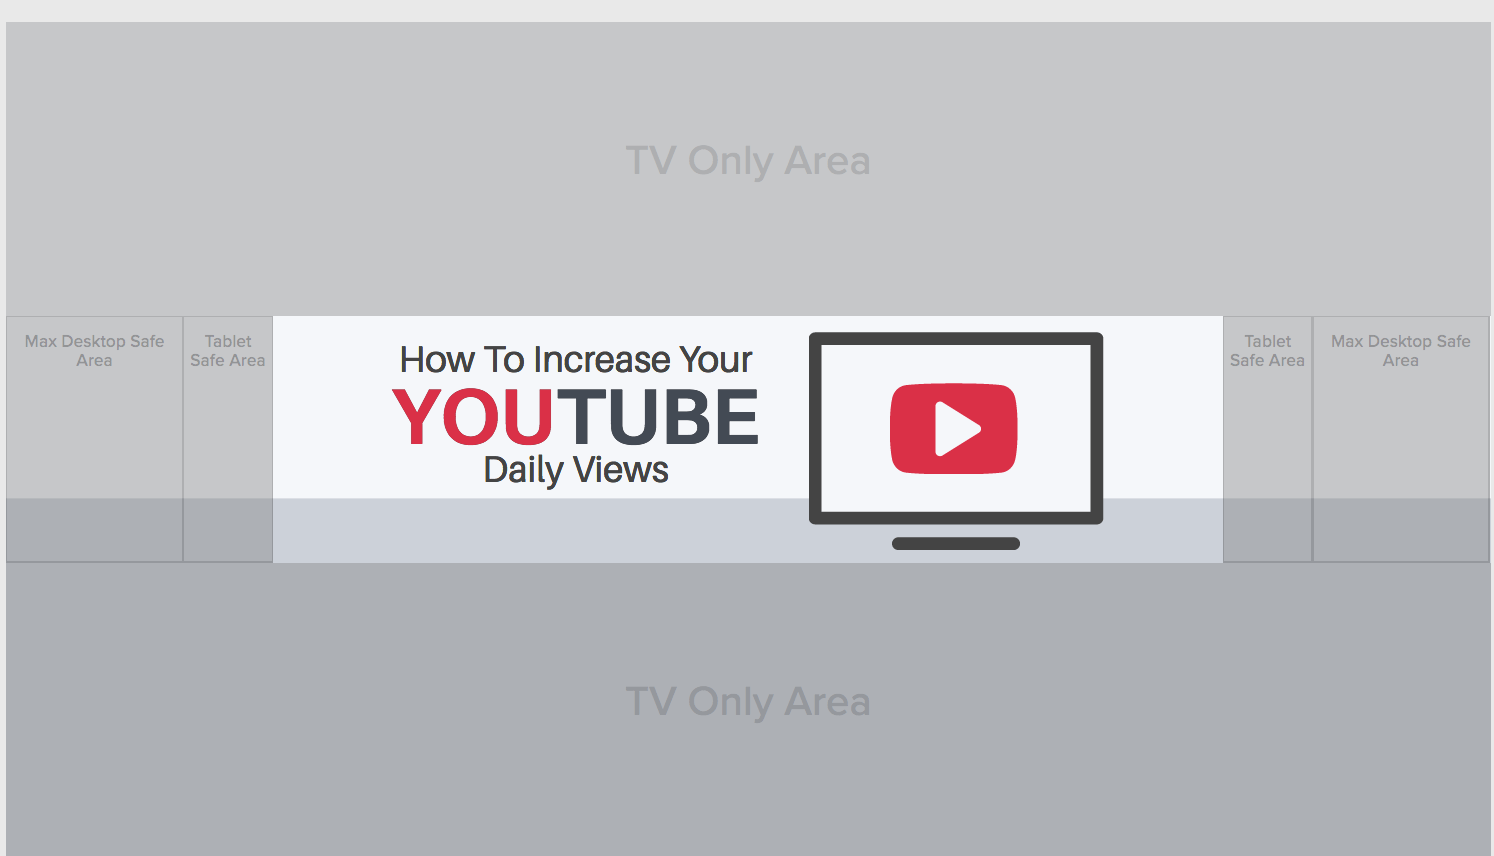 That's What's Large Two M Logo - The Ideal YouTube Channel Art Size & Best Practices